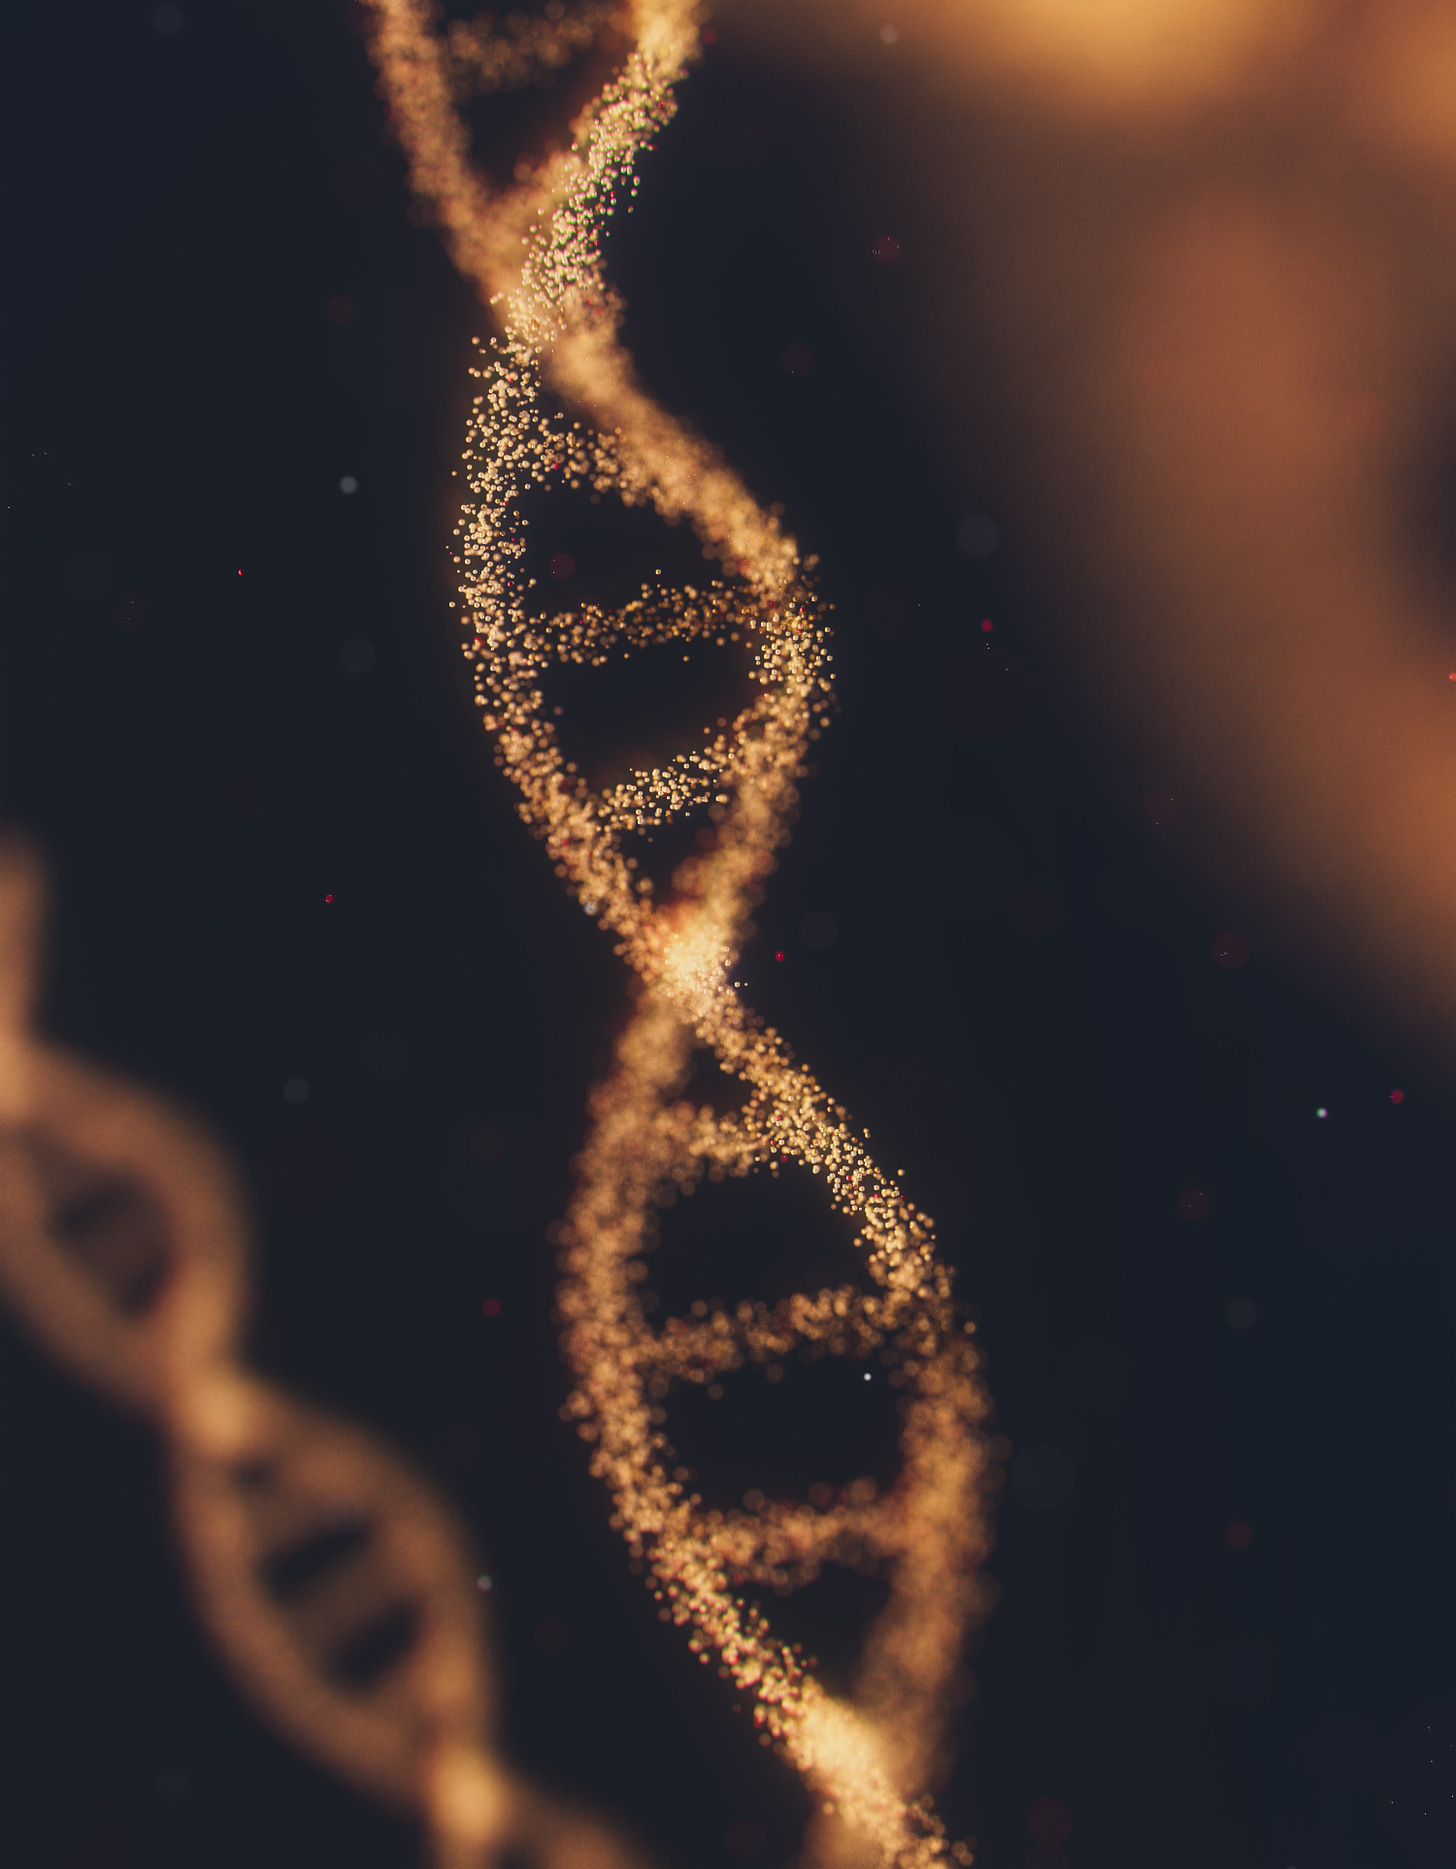 A computer-rendered image of a strand of DNA, made up of glowing yellow specks, against a dark background